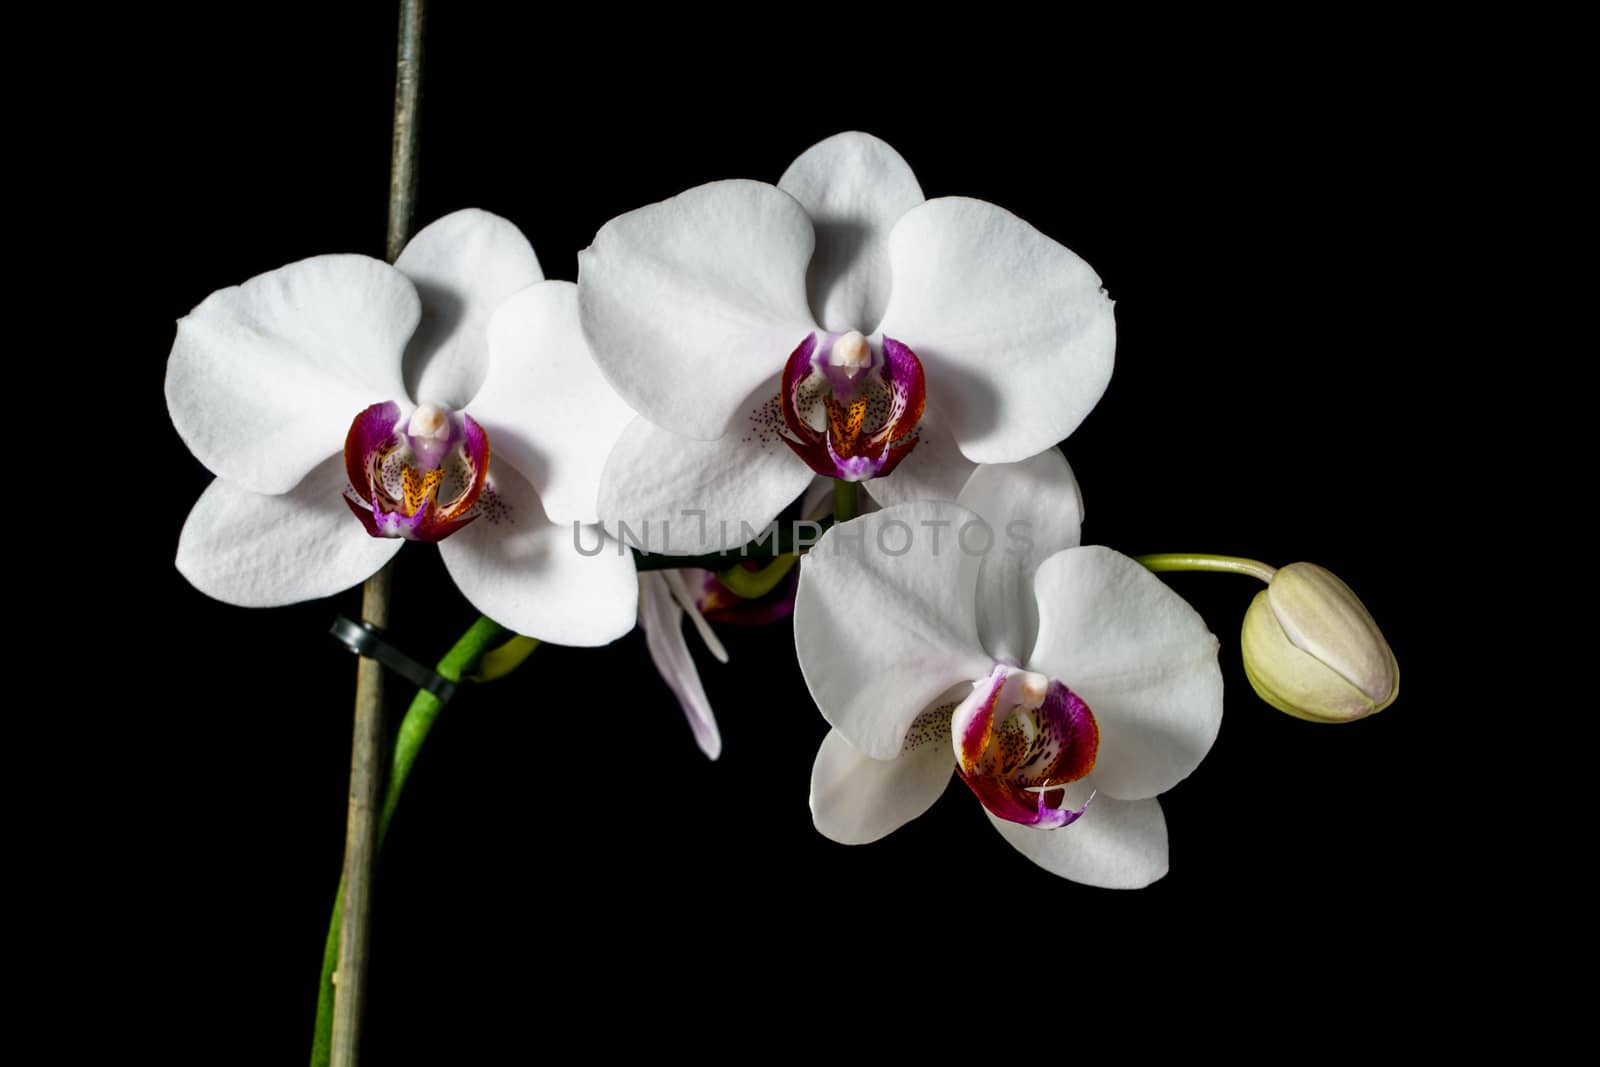 Orchid with large white flowers on a black background.